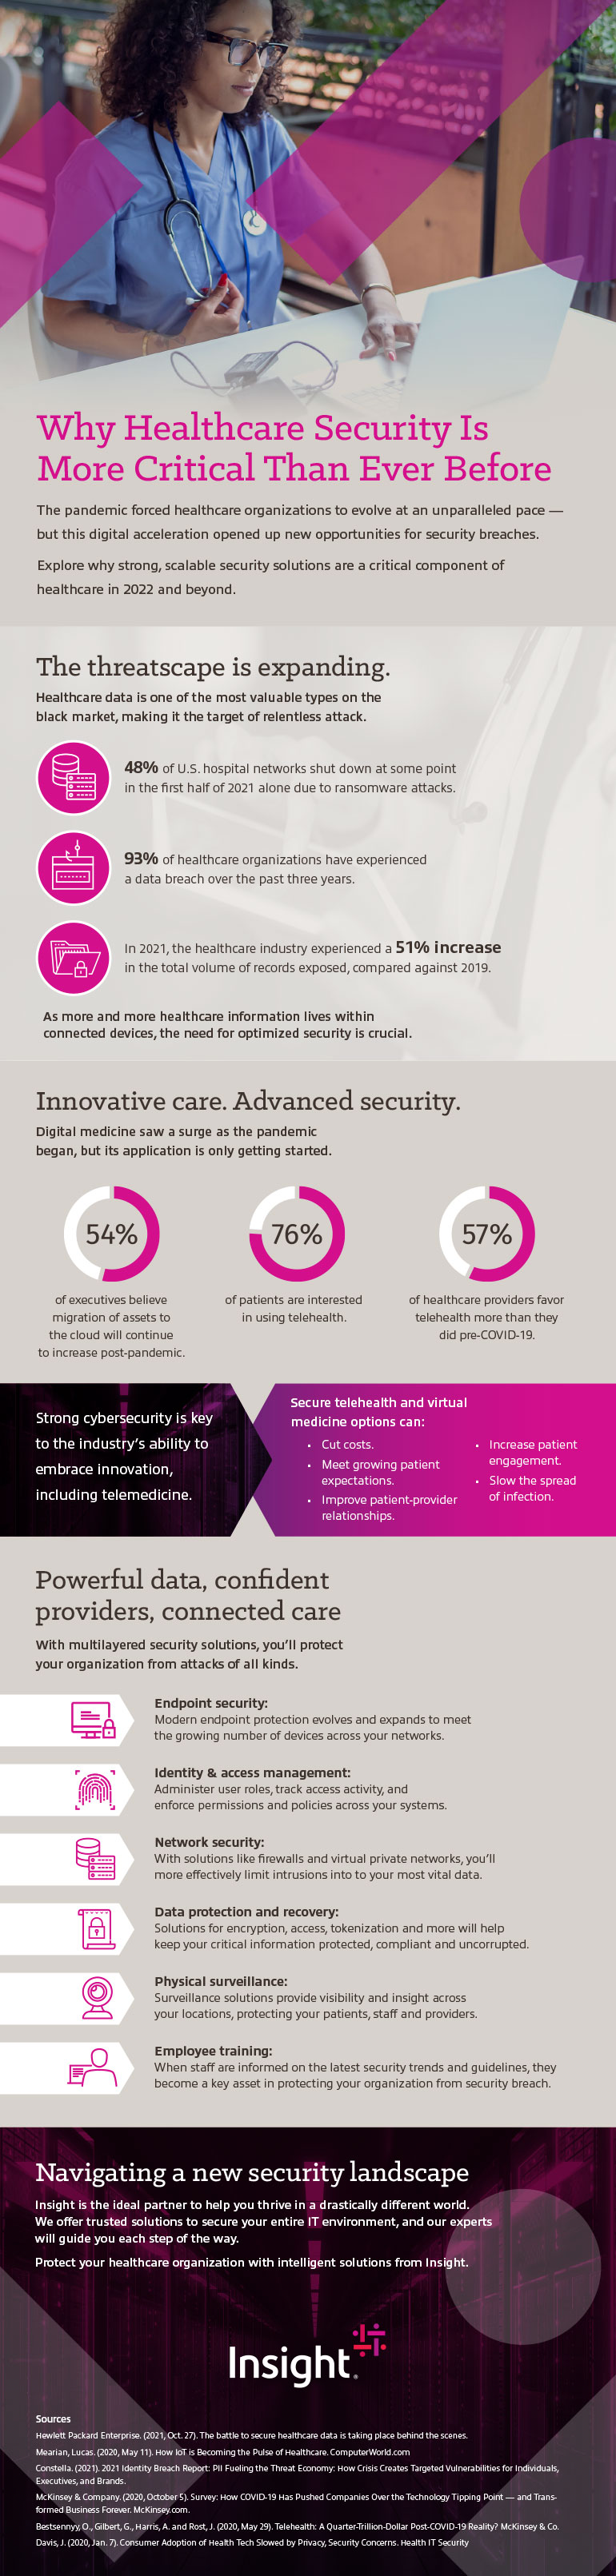 Why Healthcare Security Is More Critical Than Ever Before infographic transcribed below